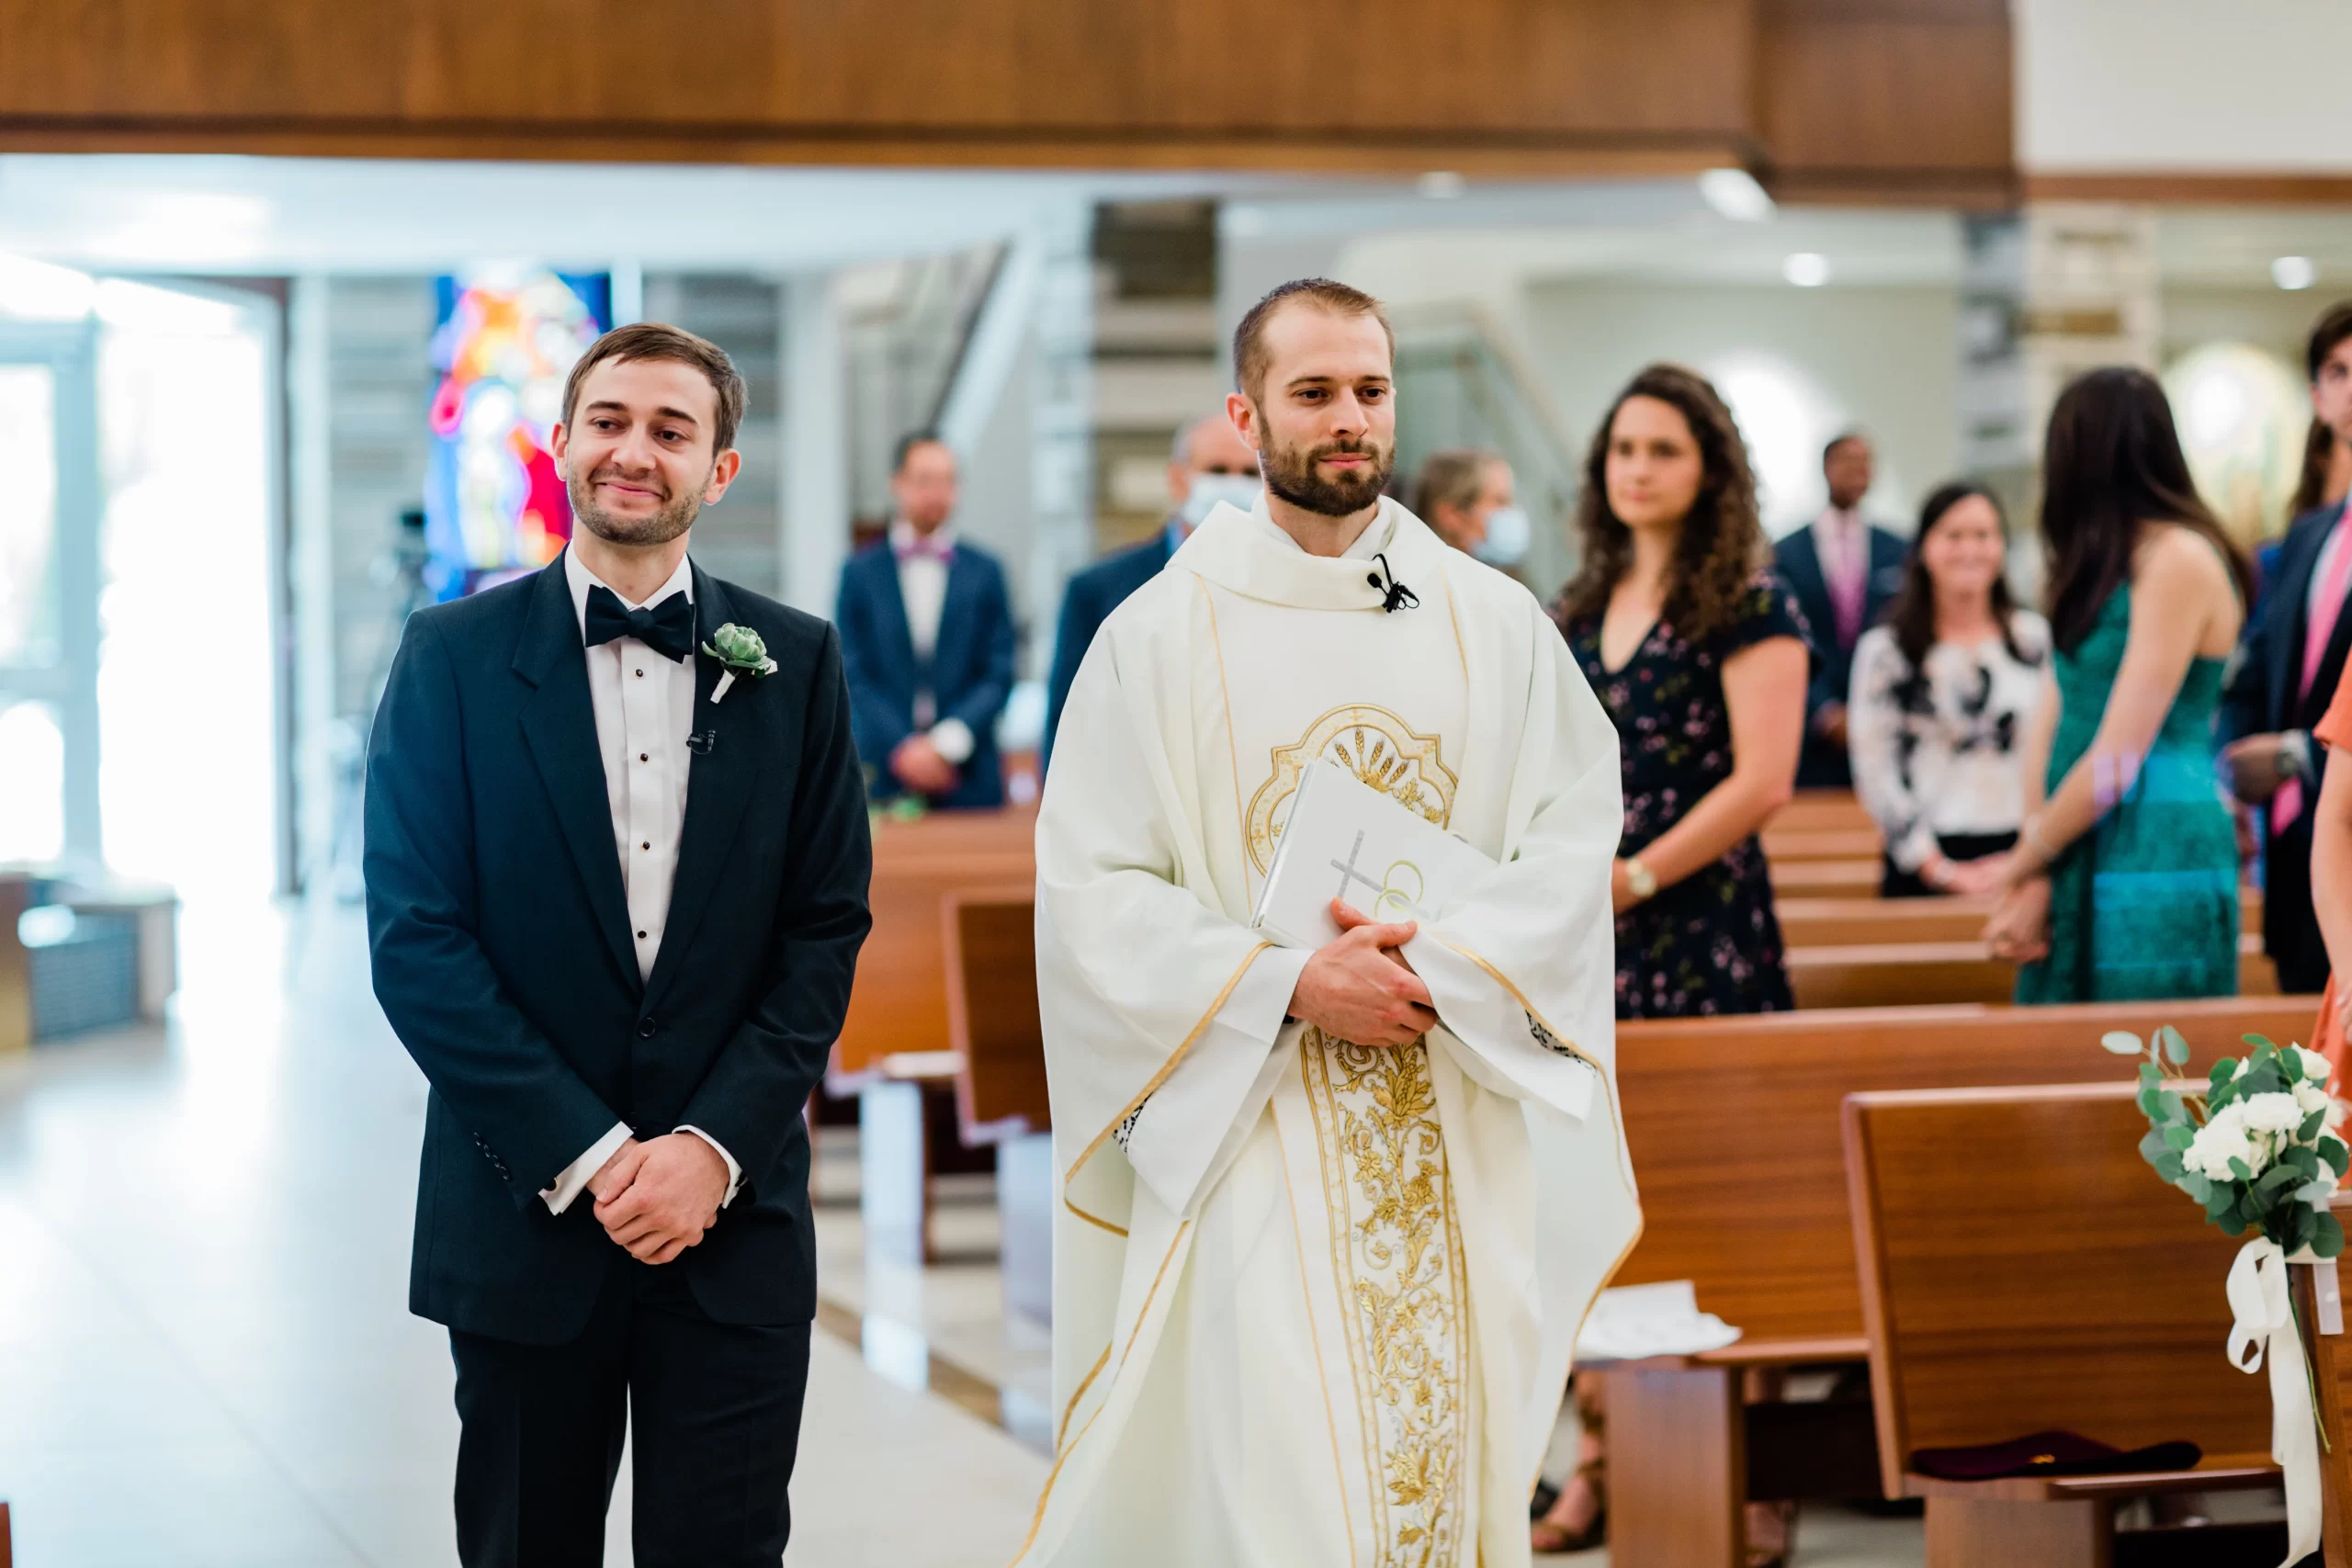 Father Ryan Stawaisz and his brother Ross on the day of Ross' wedding. Credit: Dreamy Elk Photography